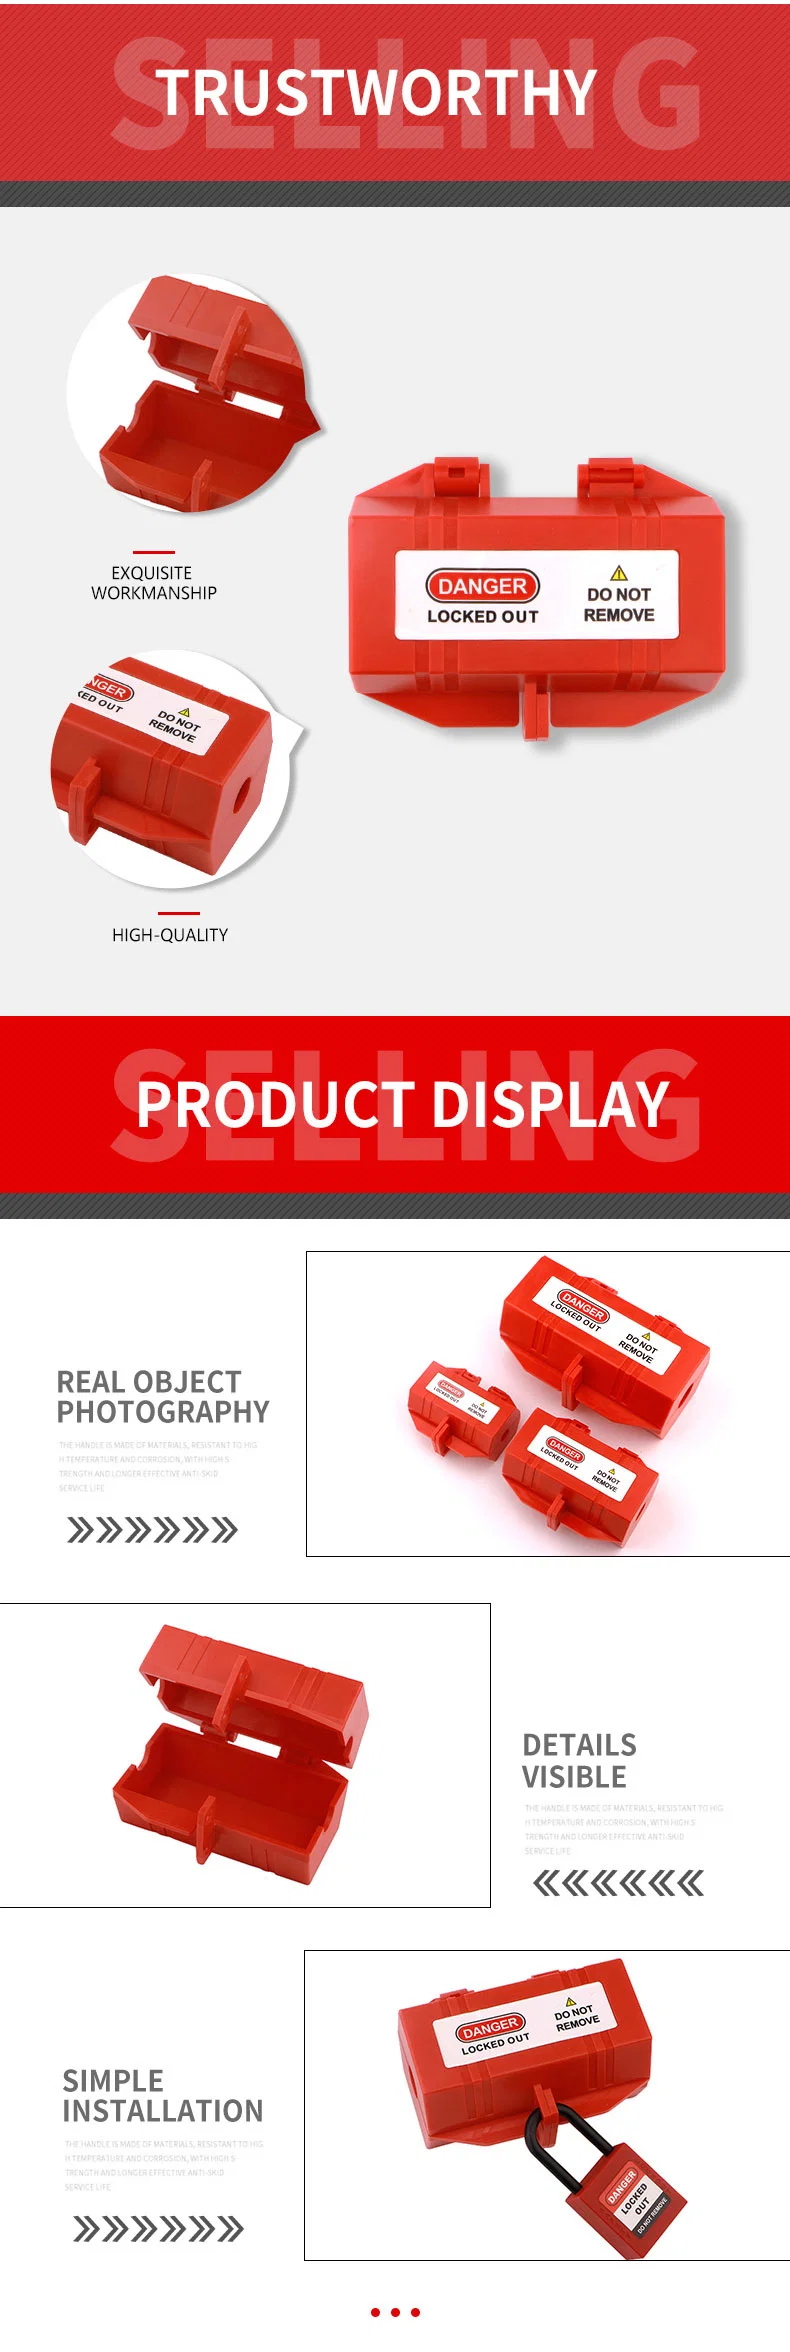 Industry Pneumatic Lockout Safety ABS Plug Lockout Tagout Securuty Lock Loto Manufacturer